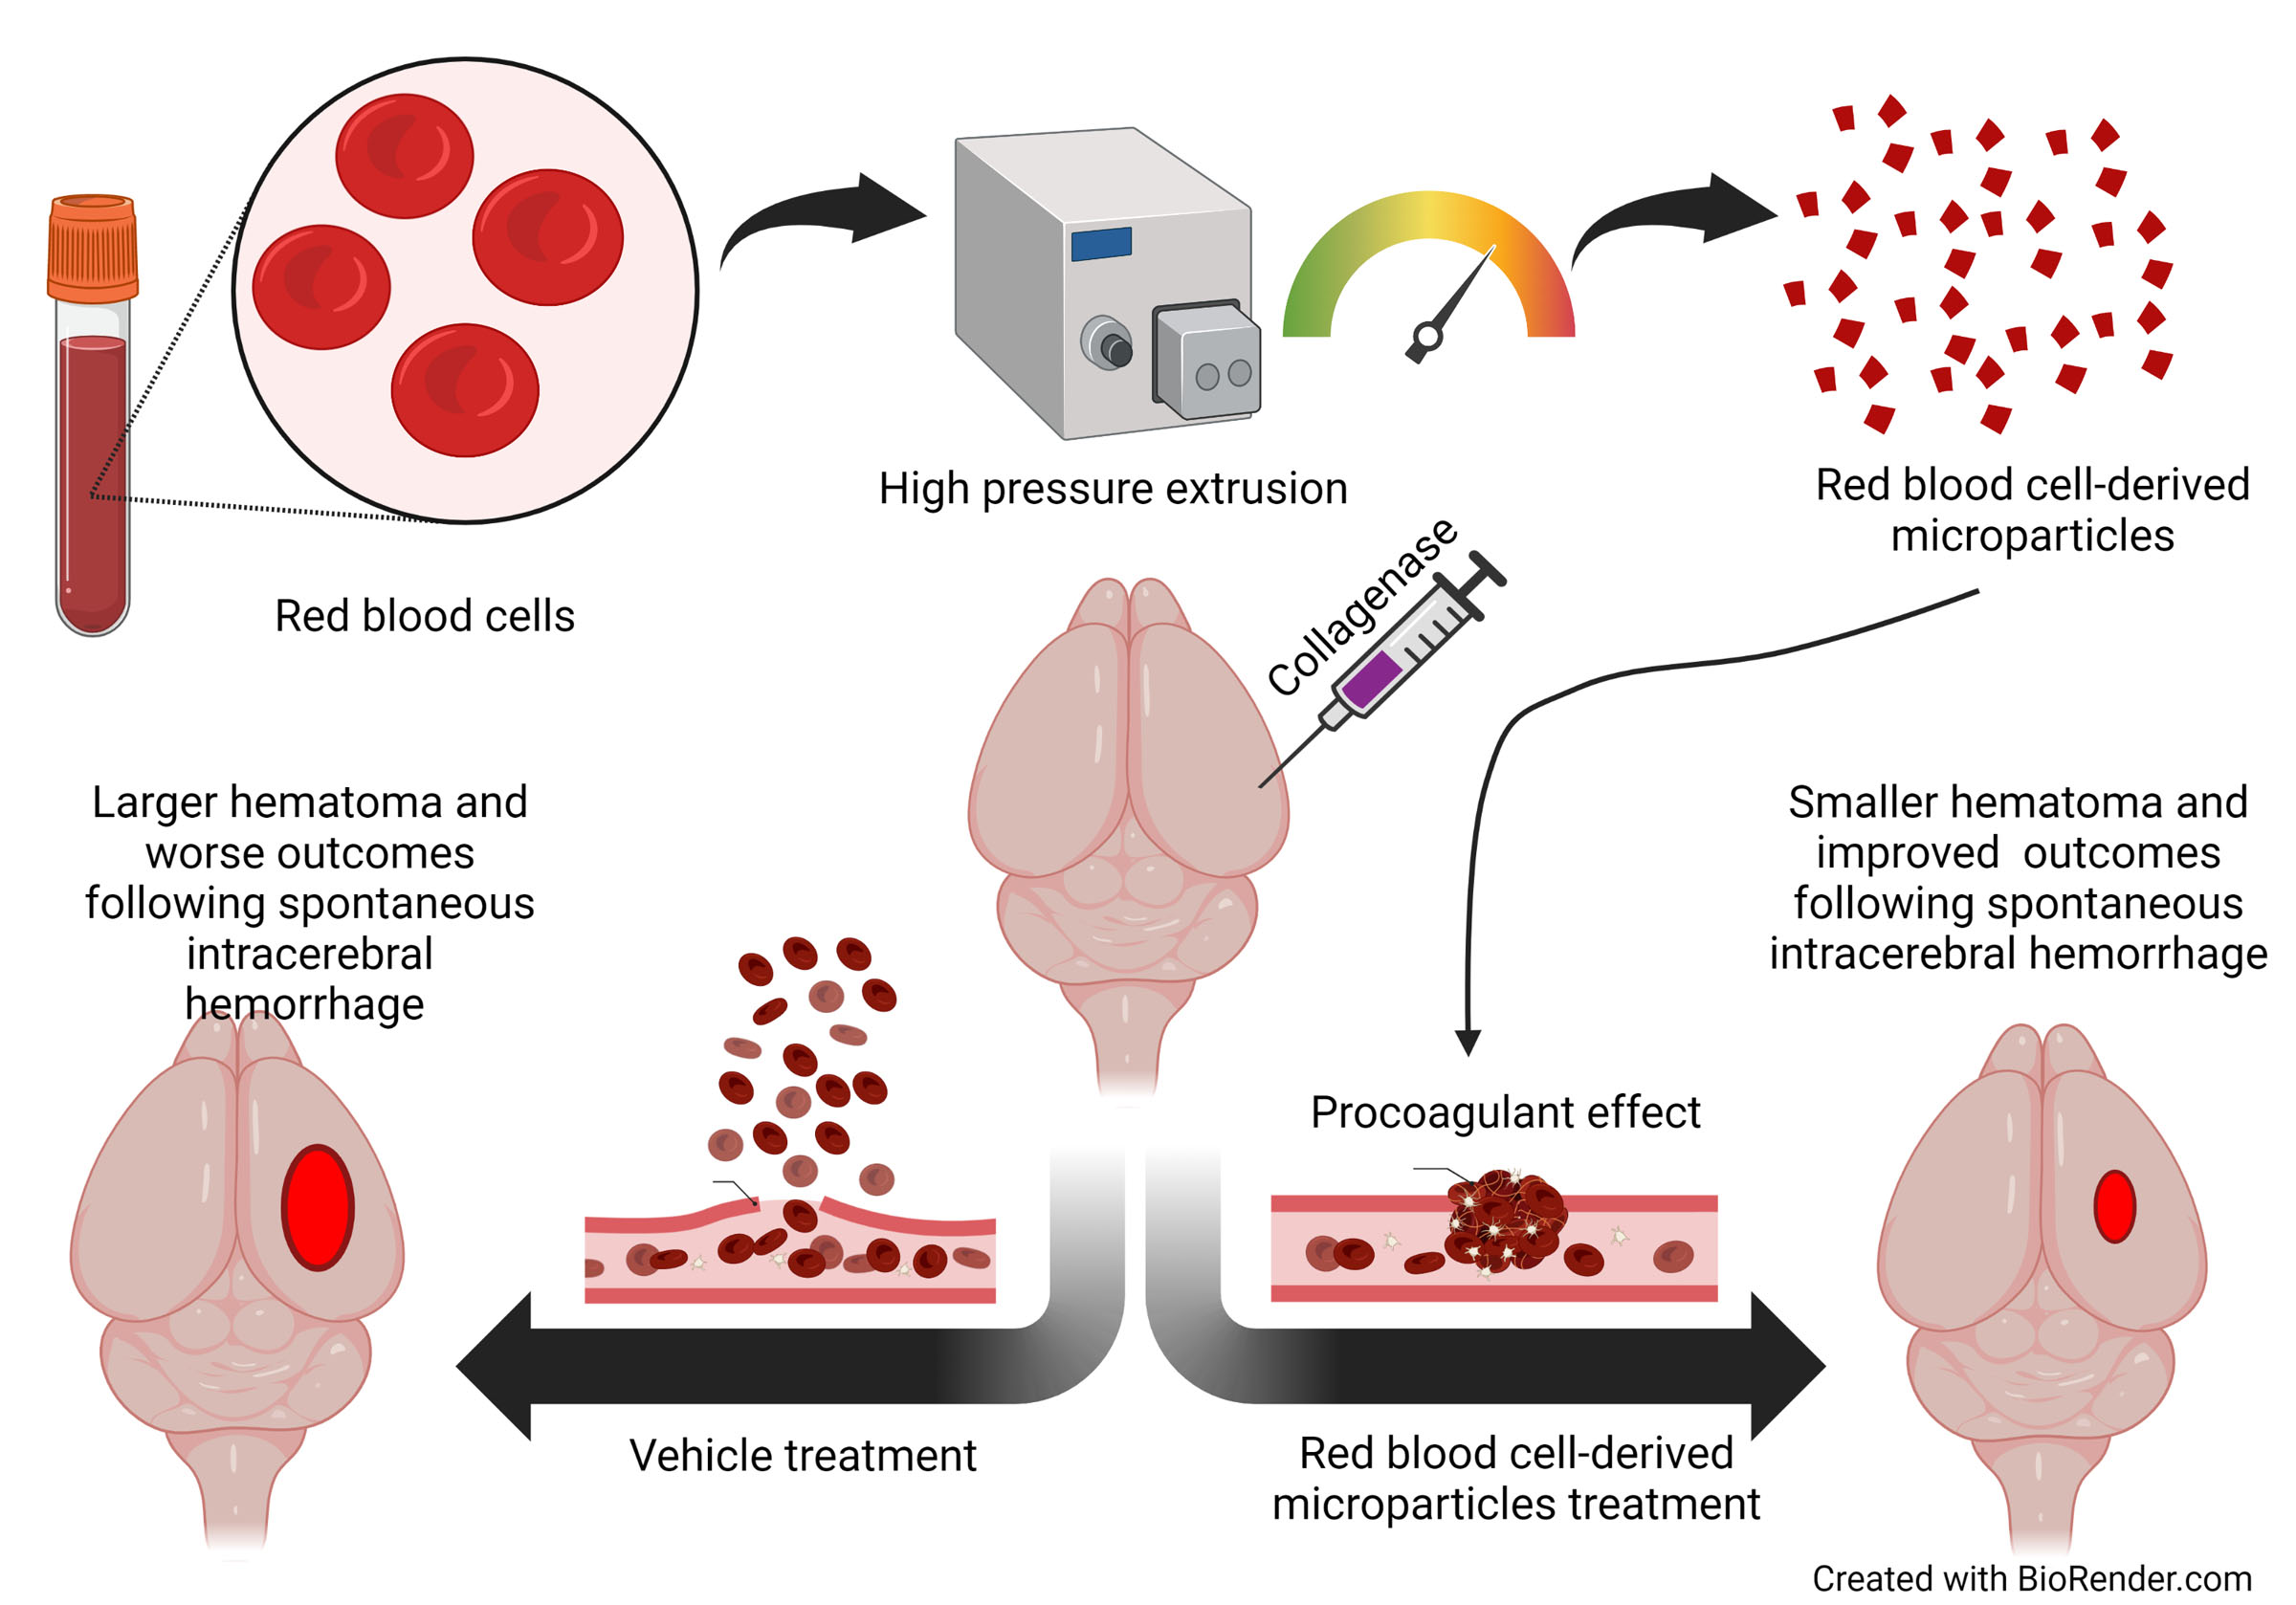 Red Blood Cell Microparticles Limit Hematoma Growth in Intracerebral Hemorrhage